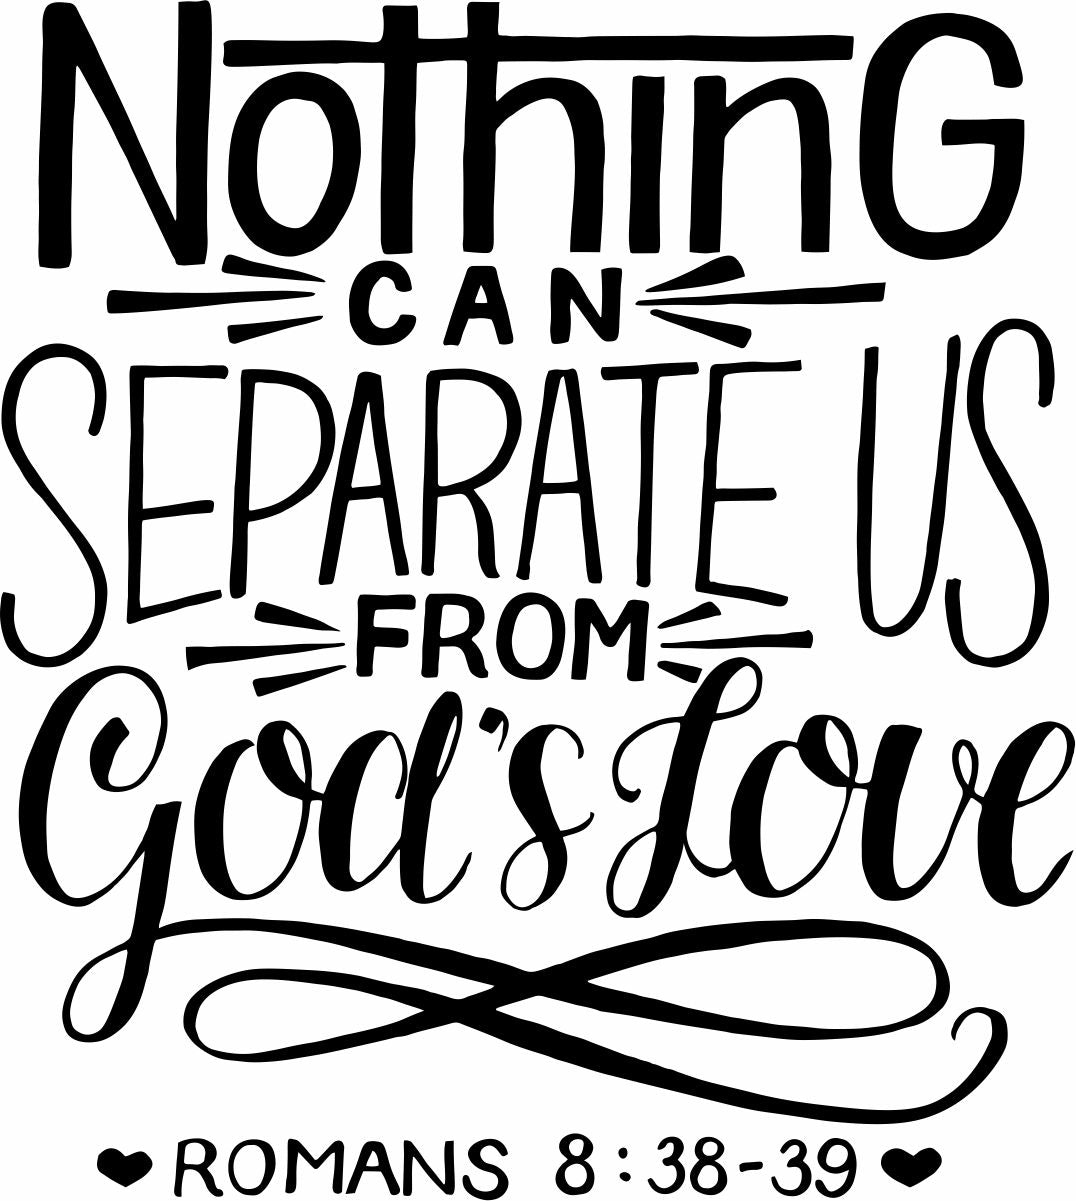 Nothing can separate us God's Love Window Decal